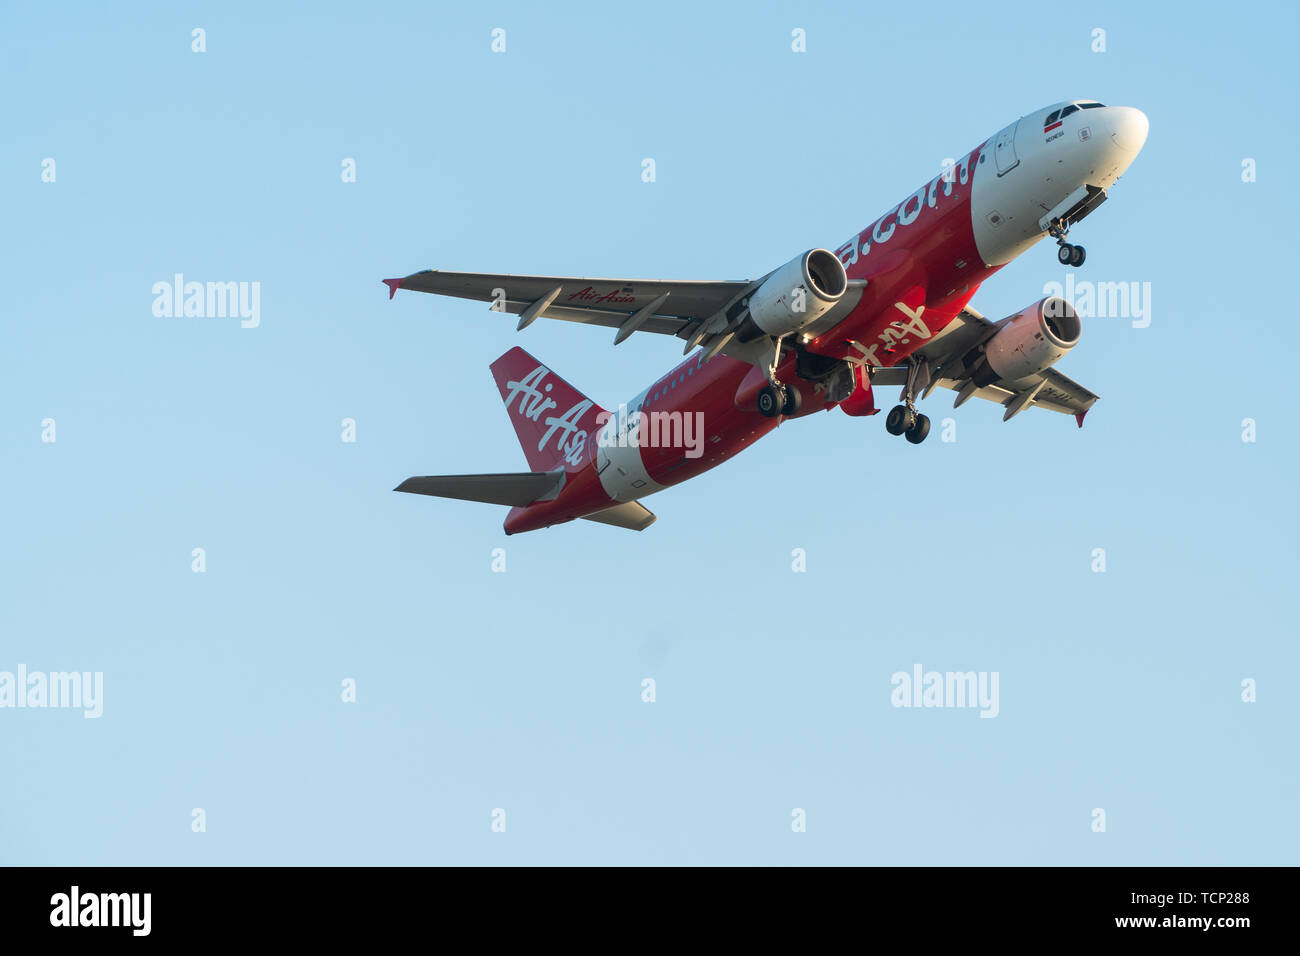 BALI/INDONESIA-JUNE 06 2019: Air Asia, one of the airlines in Indonesia, is  flying over the blue sky. Landing gear is in the process of being stored  Stock Photo - Alamy